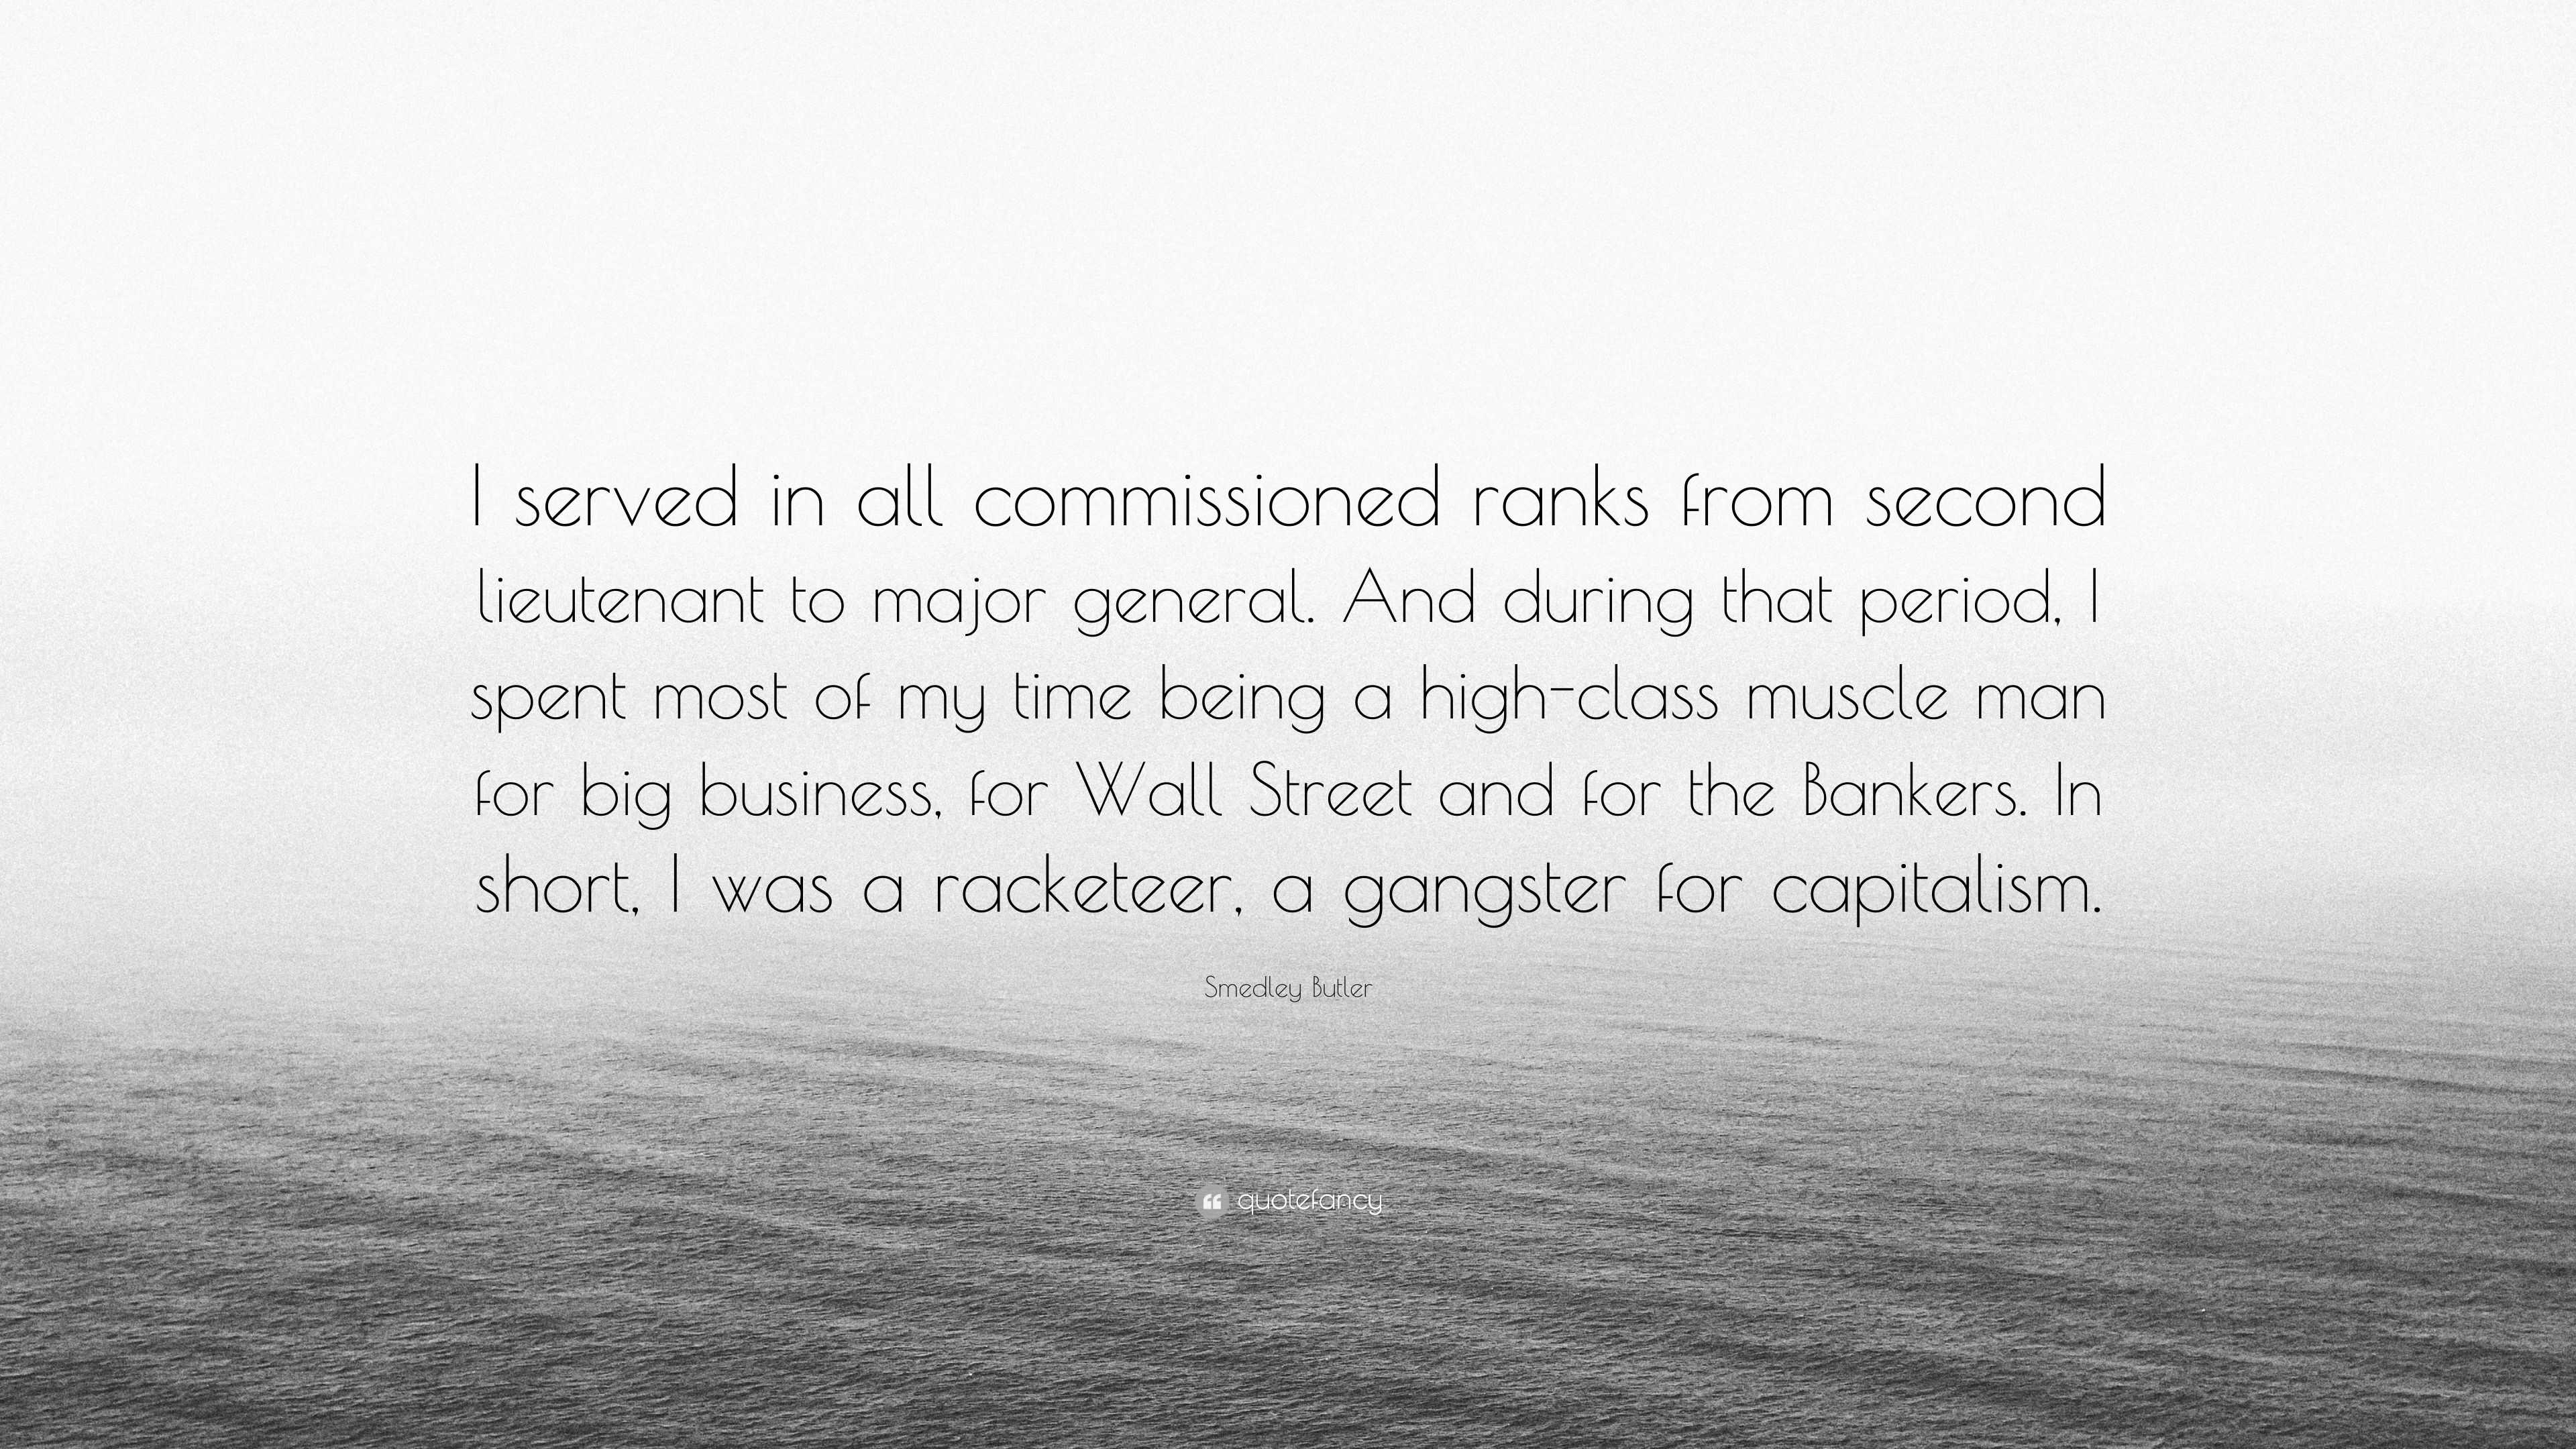 Smedley Butler Quote: “I served in all commissioned ranks from second